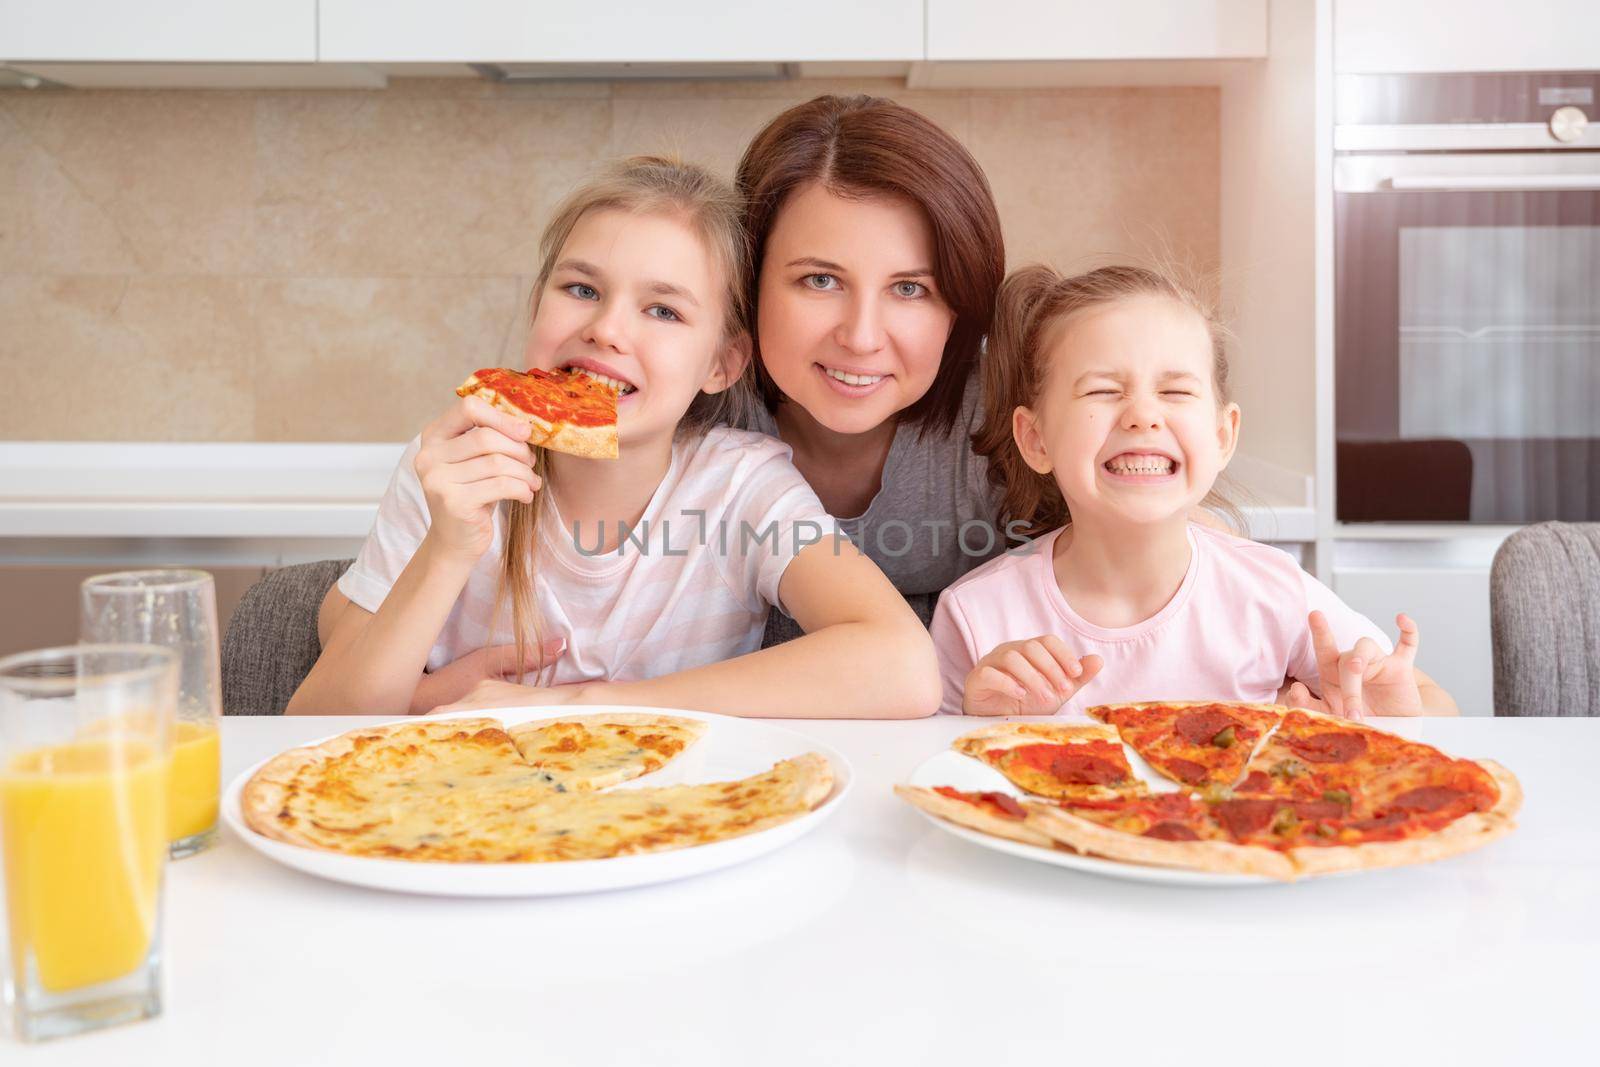 Mother and two daughters eating homemade pizza at a table in kitchen, happy family concept by Mariakray